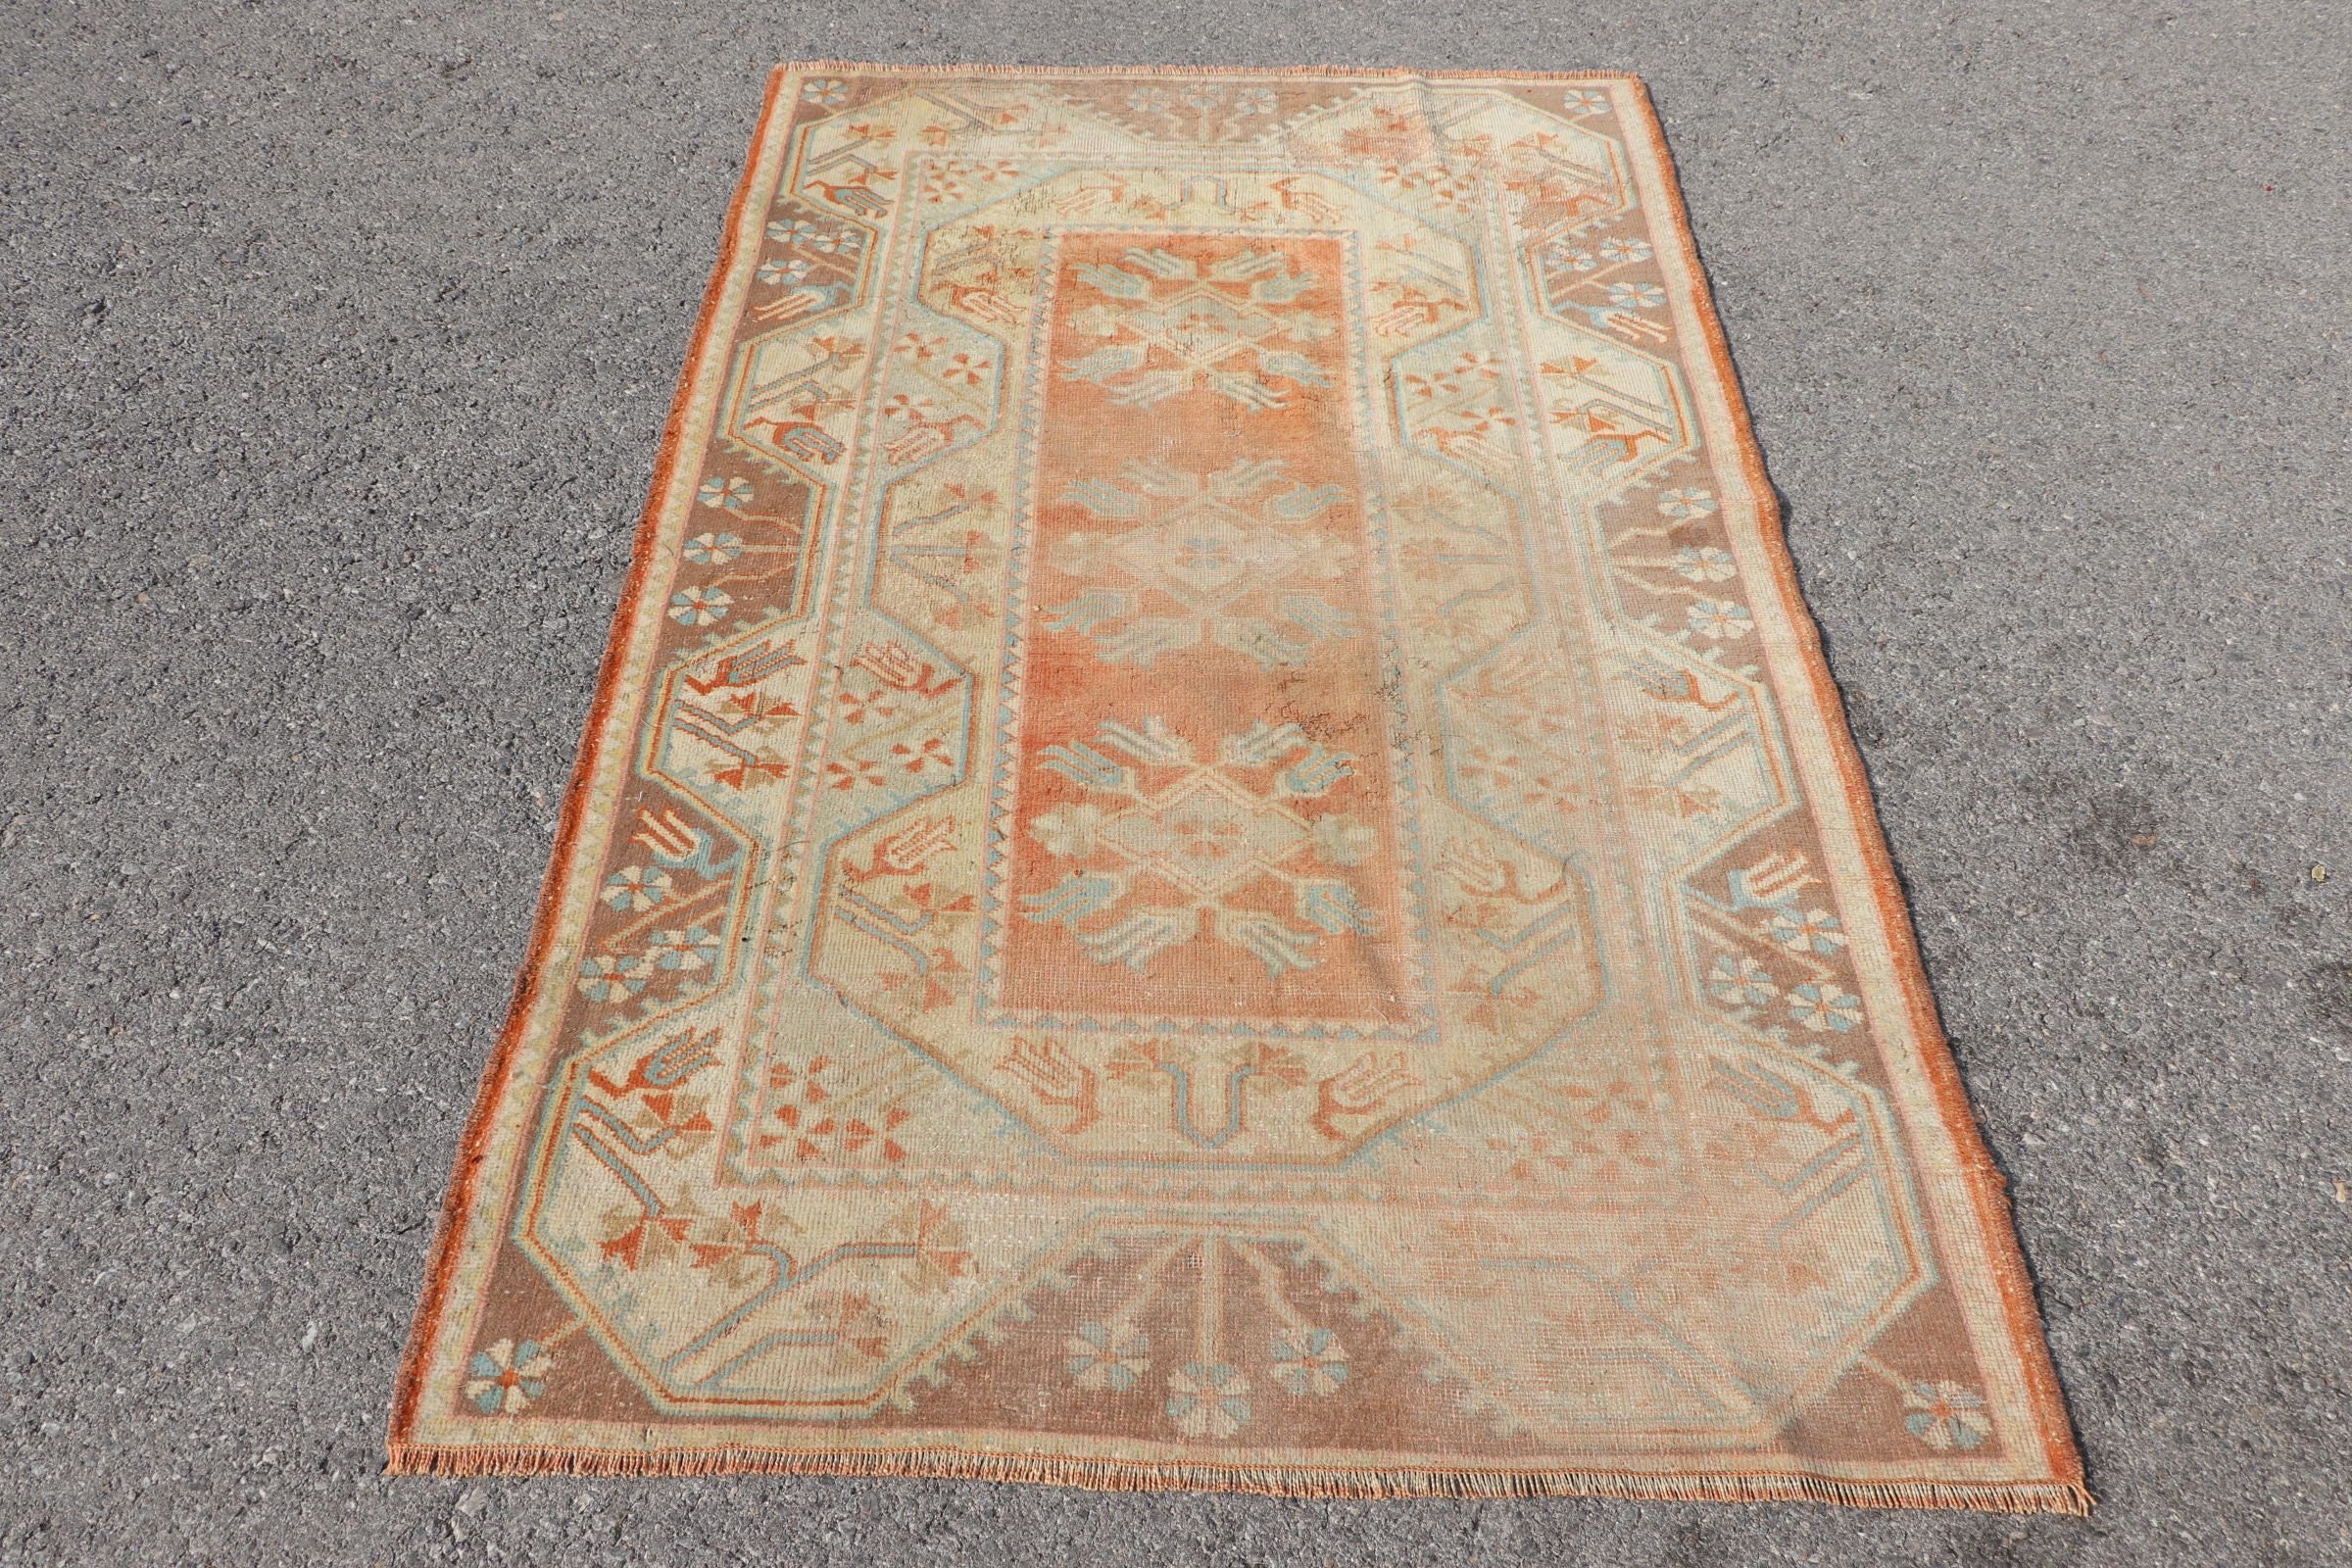 Orange Antique Rug, Anatolian Rug, Entry Rug, Floor Rugs, Turkish Rug, Kitchen Rugs, Vintage Rug, Rugs for Bedroom, 3.8x6 ft Accent Rugs